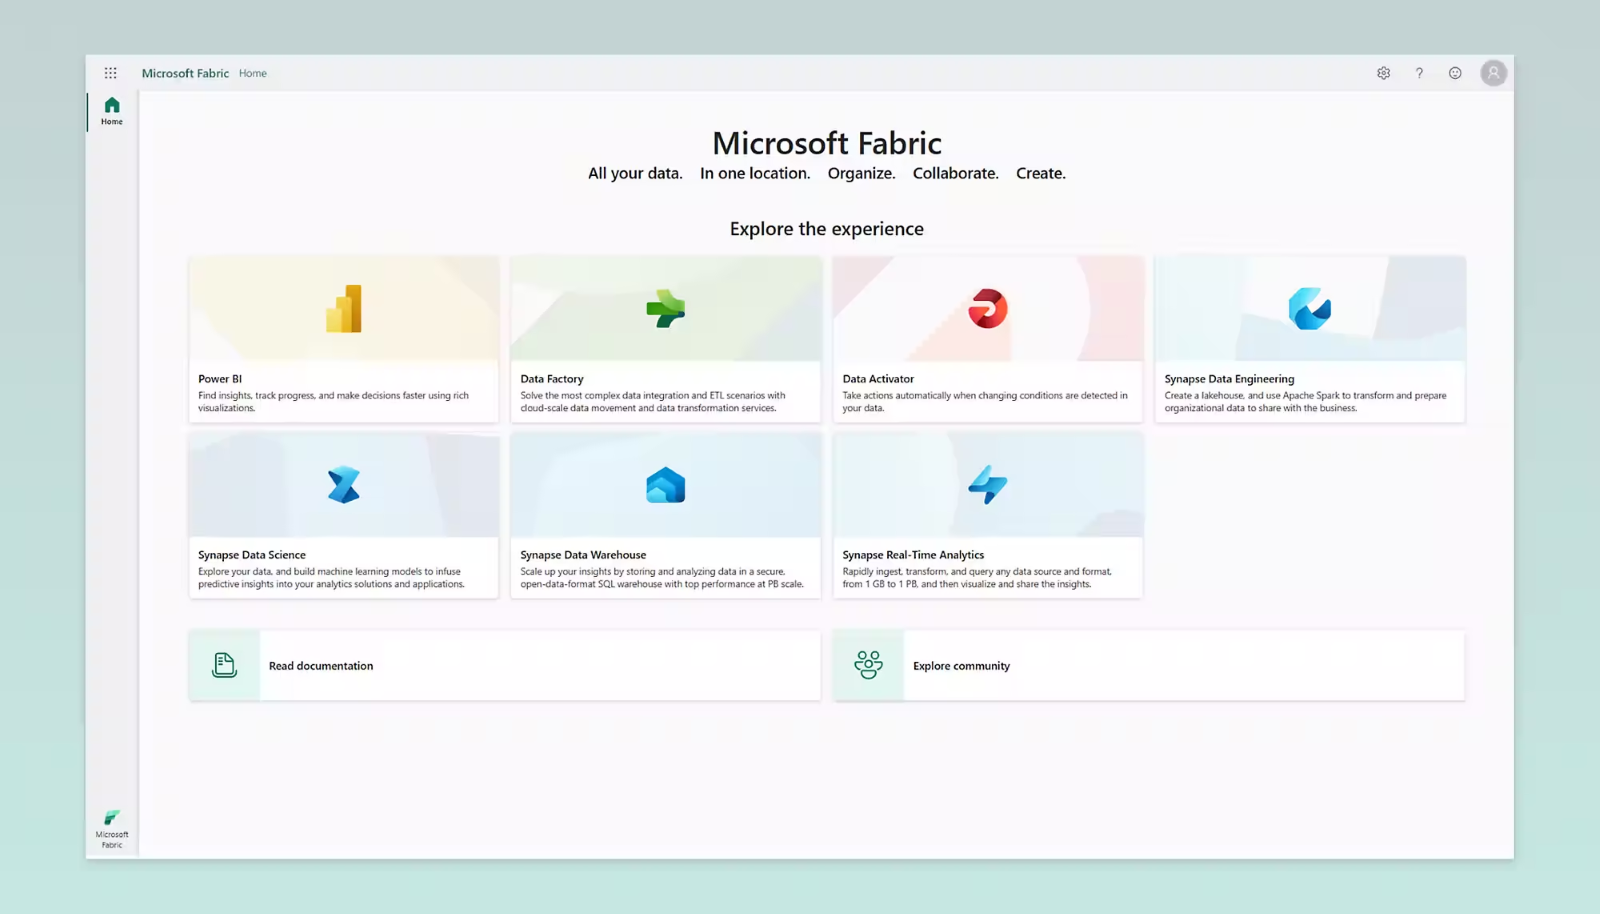 How AnalyticsCreator Can Help Companies Make the Most of Microsoft Fabric